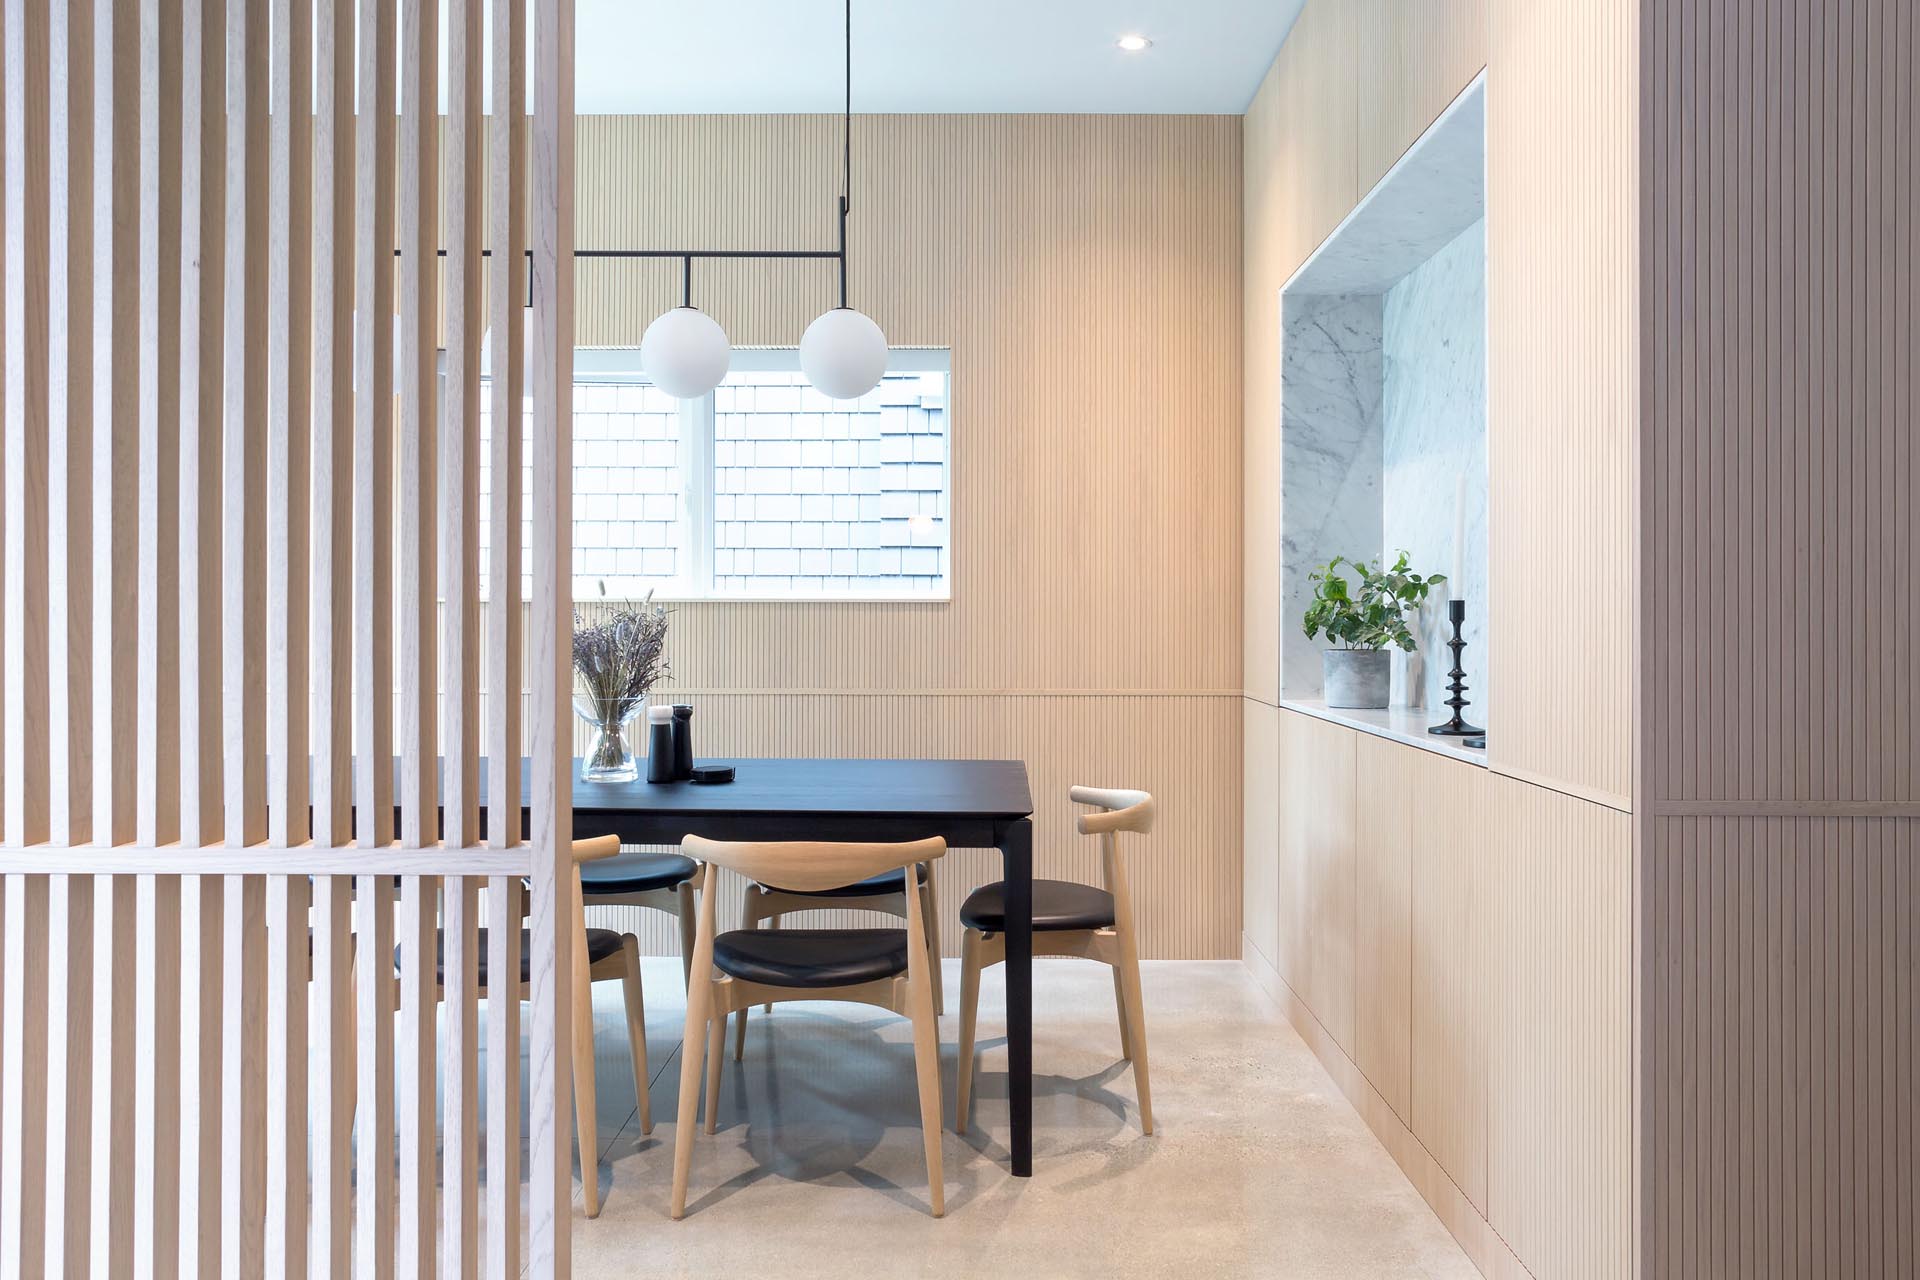 Wood clad interiors made from Tambour oak veneer, like in this modern dining room, add a sense of warmth to the home, while the floors are polished concrete.